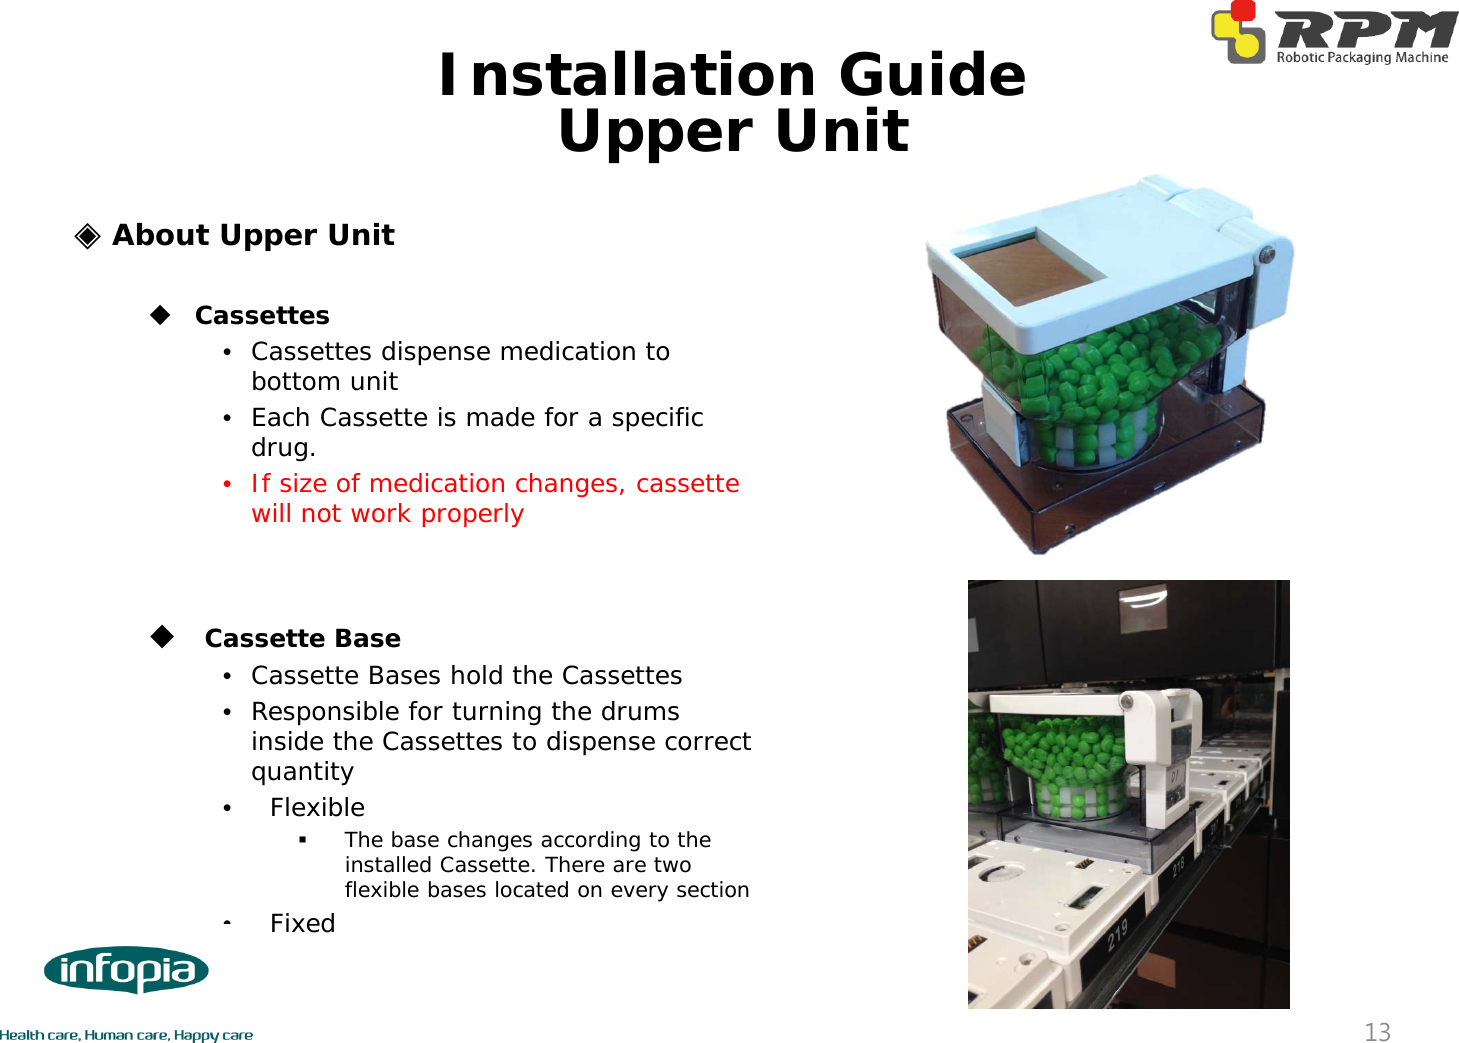 ◈About Upper UnitCassettes•Cassettes dispense medication to bottom unit•Each Cassette is made for a specific drug.•If size of medication changes, cassette will not work properlyCassette Base•Cassette Bases hold the Cassettes •Responsible for turning the drums inside the Cassettes to dispense correct quantity•FlexibleThe base changes according to the installed Cassette. There are two flexible bases located on every section•FixedUpper Unit13Installation Guide